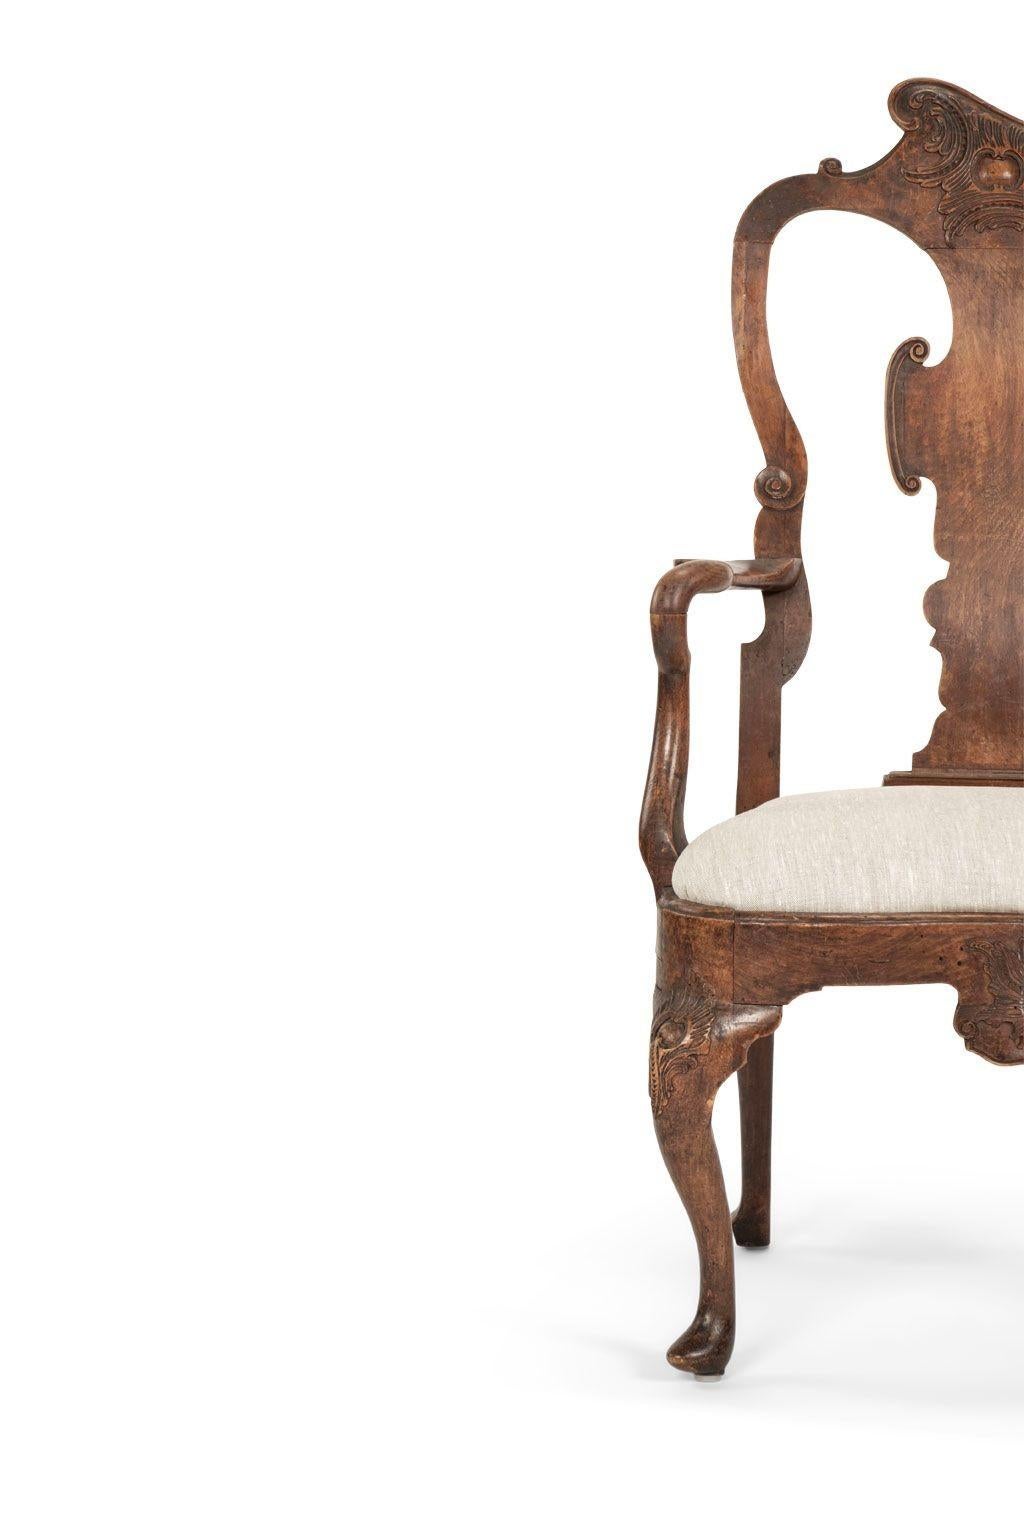 Swedish rococo walnut armchair circa 1740-1769. Finely hand-carved in a nice, large scale. Excellent condition. Stable, sold and sturdy. Mortise and tenon joints. Exquisite carved detail. Initialed 